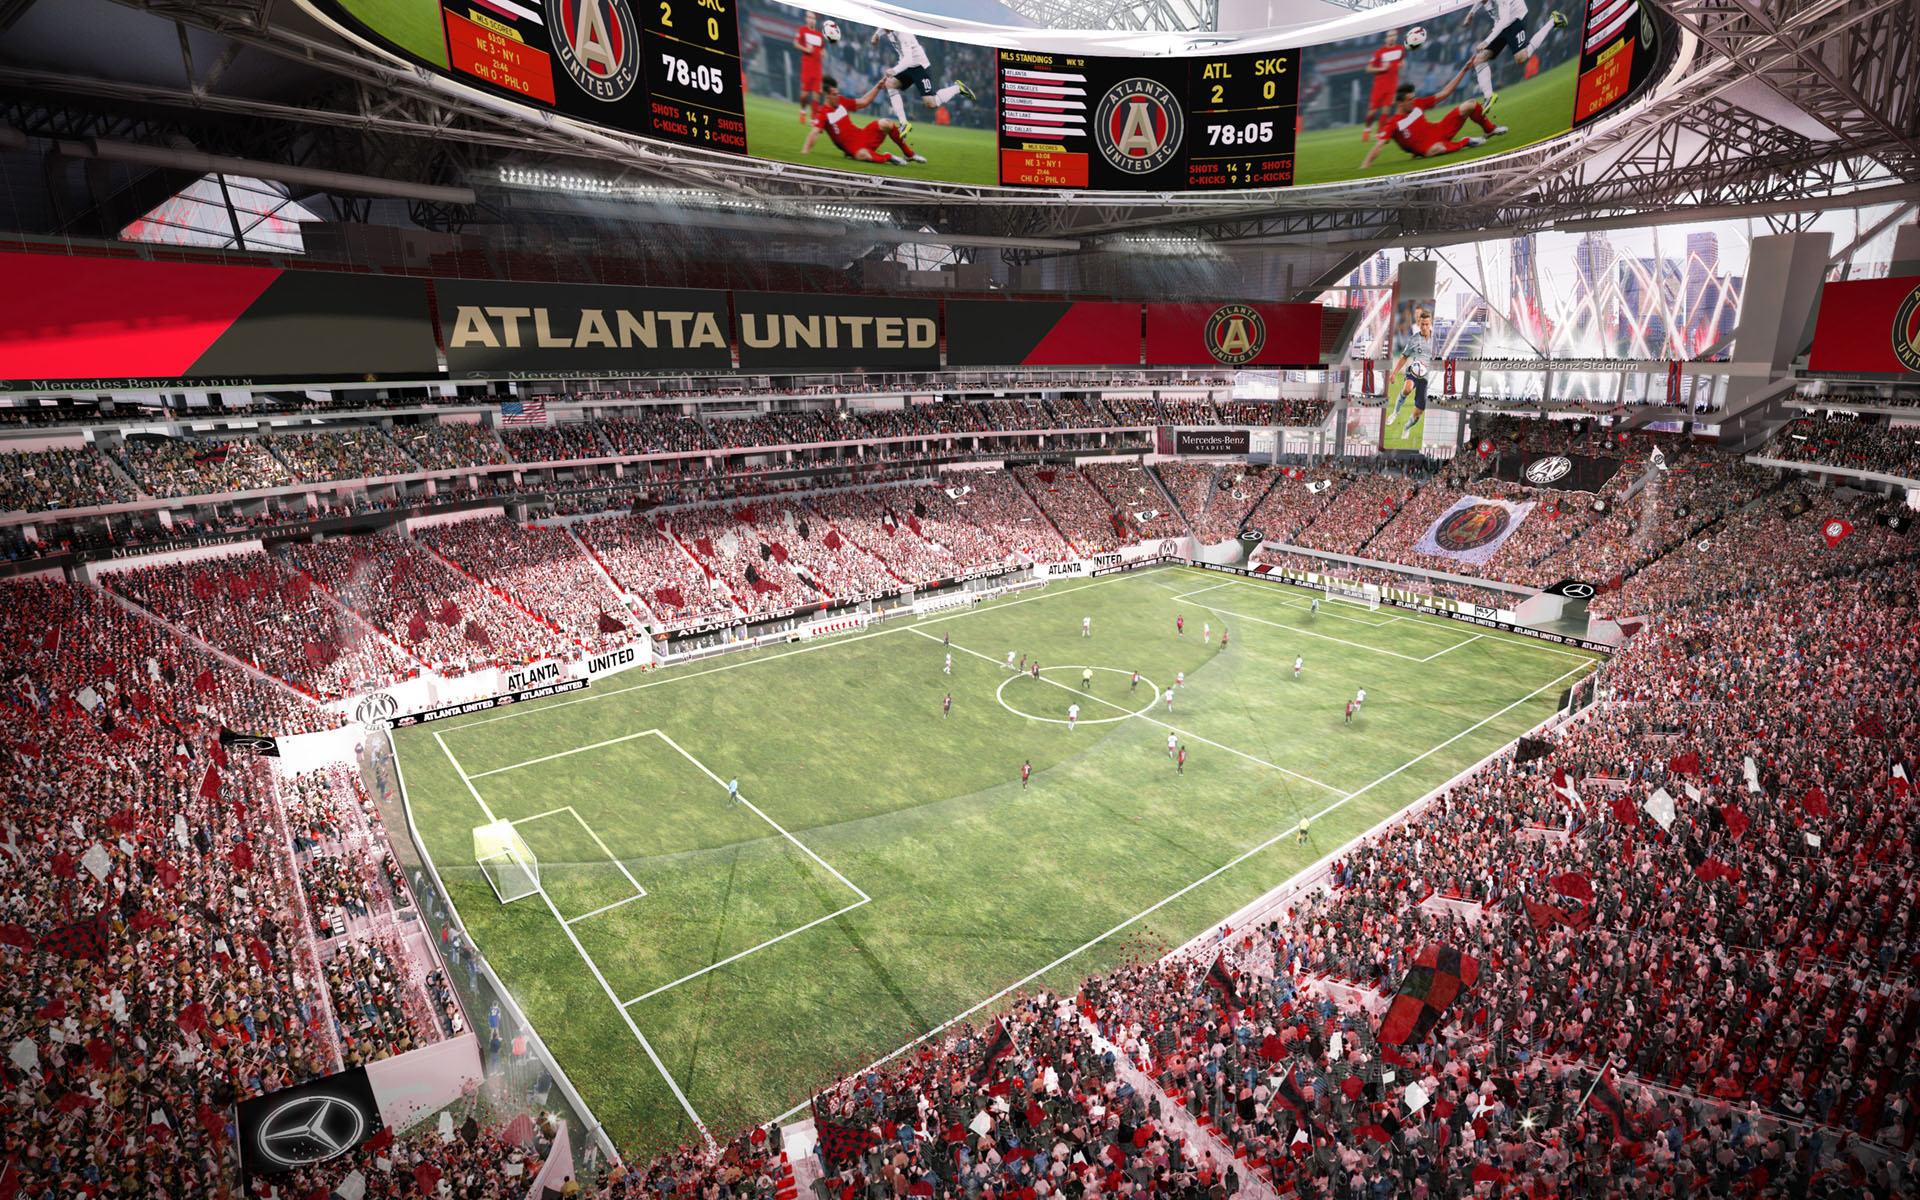 Action Packed Weekend of Major League Soccer Ahead as Atlanta United Wrap up the Sunday Roster, FC Dallas at Home in Major Clash, Orlando City Looking to Upset DC United